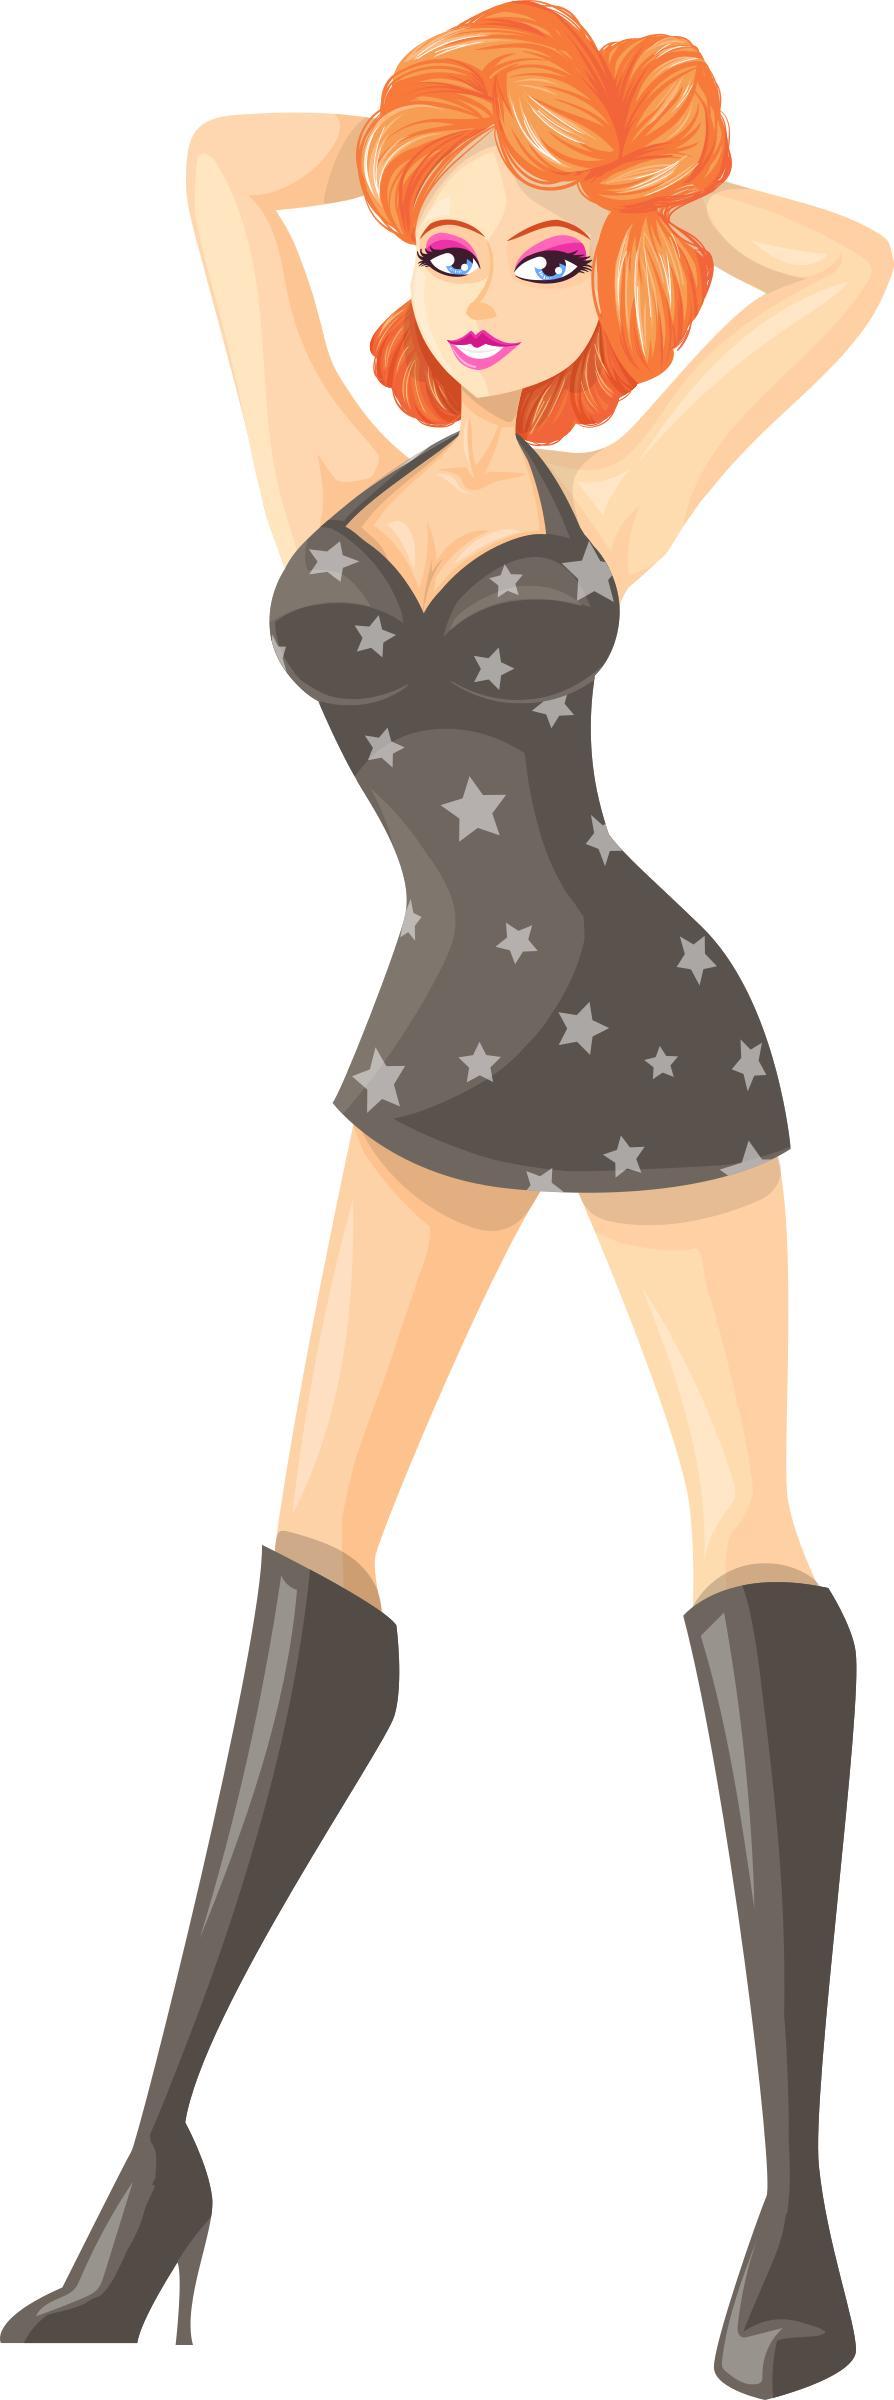 Young lady 2 (redhead, light skin, starry dress #1) png transparent